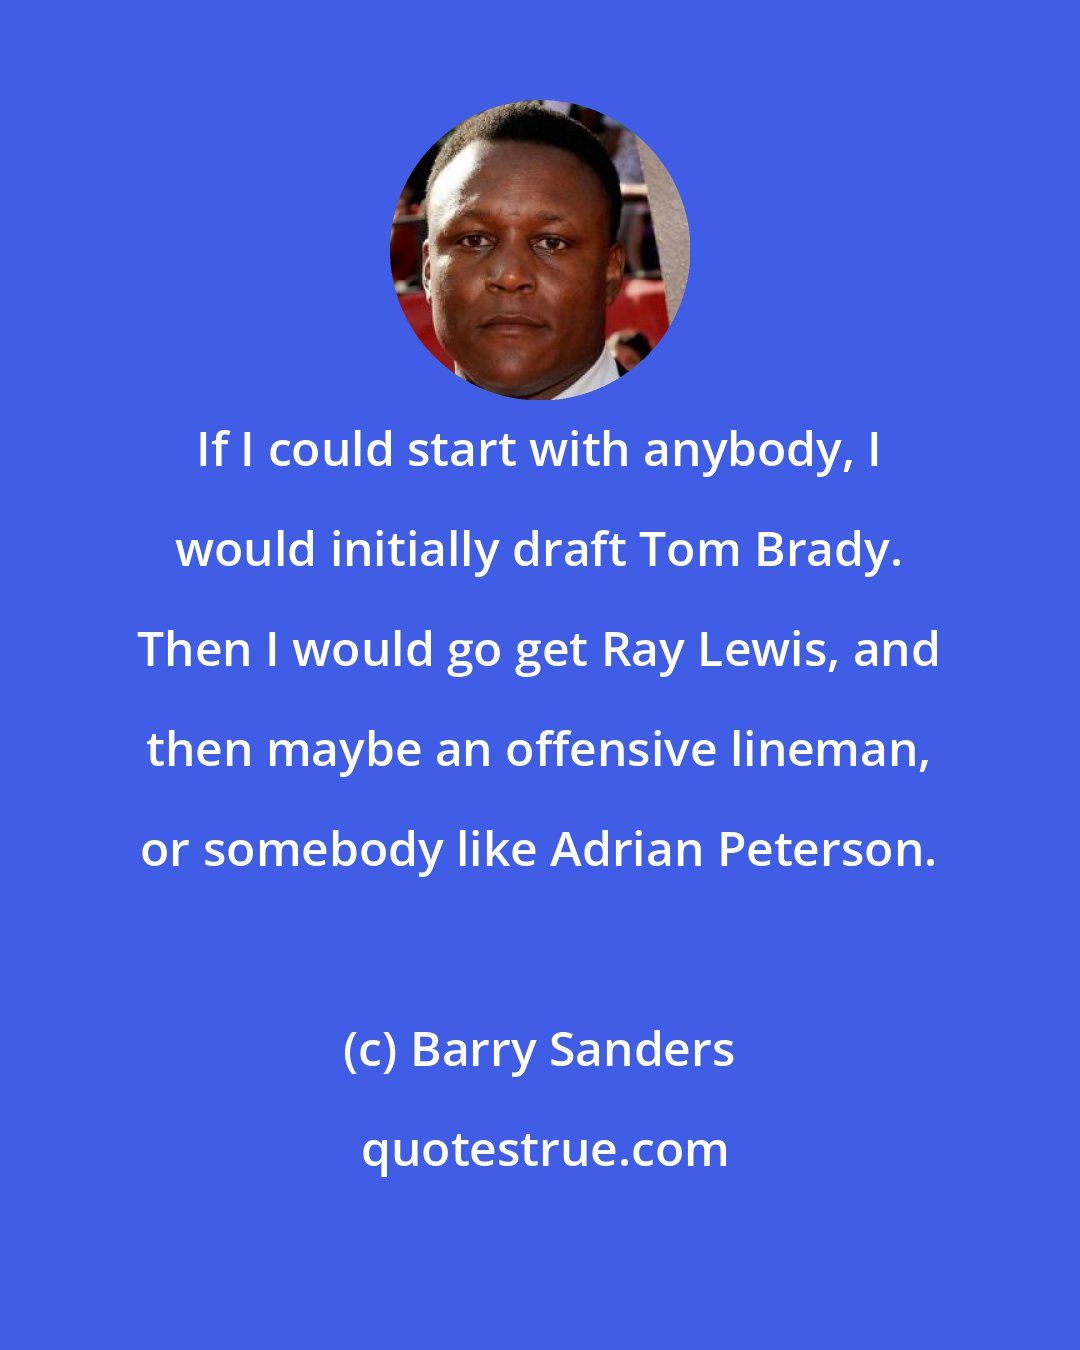 Barry Sanders: If I could start with anybody, I would initially draft Tom Brady. Then I would go get Ray Lewis, and then maybe an offensive lineman, or somebody like Adrian Peterson.